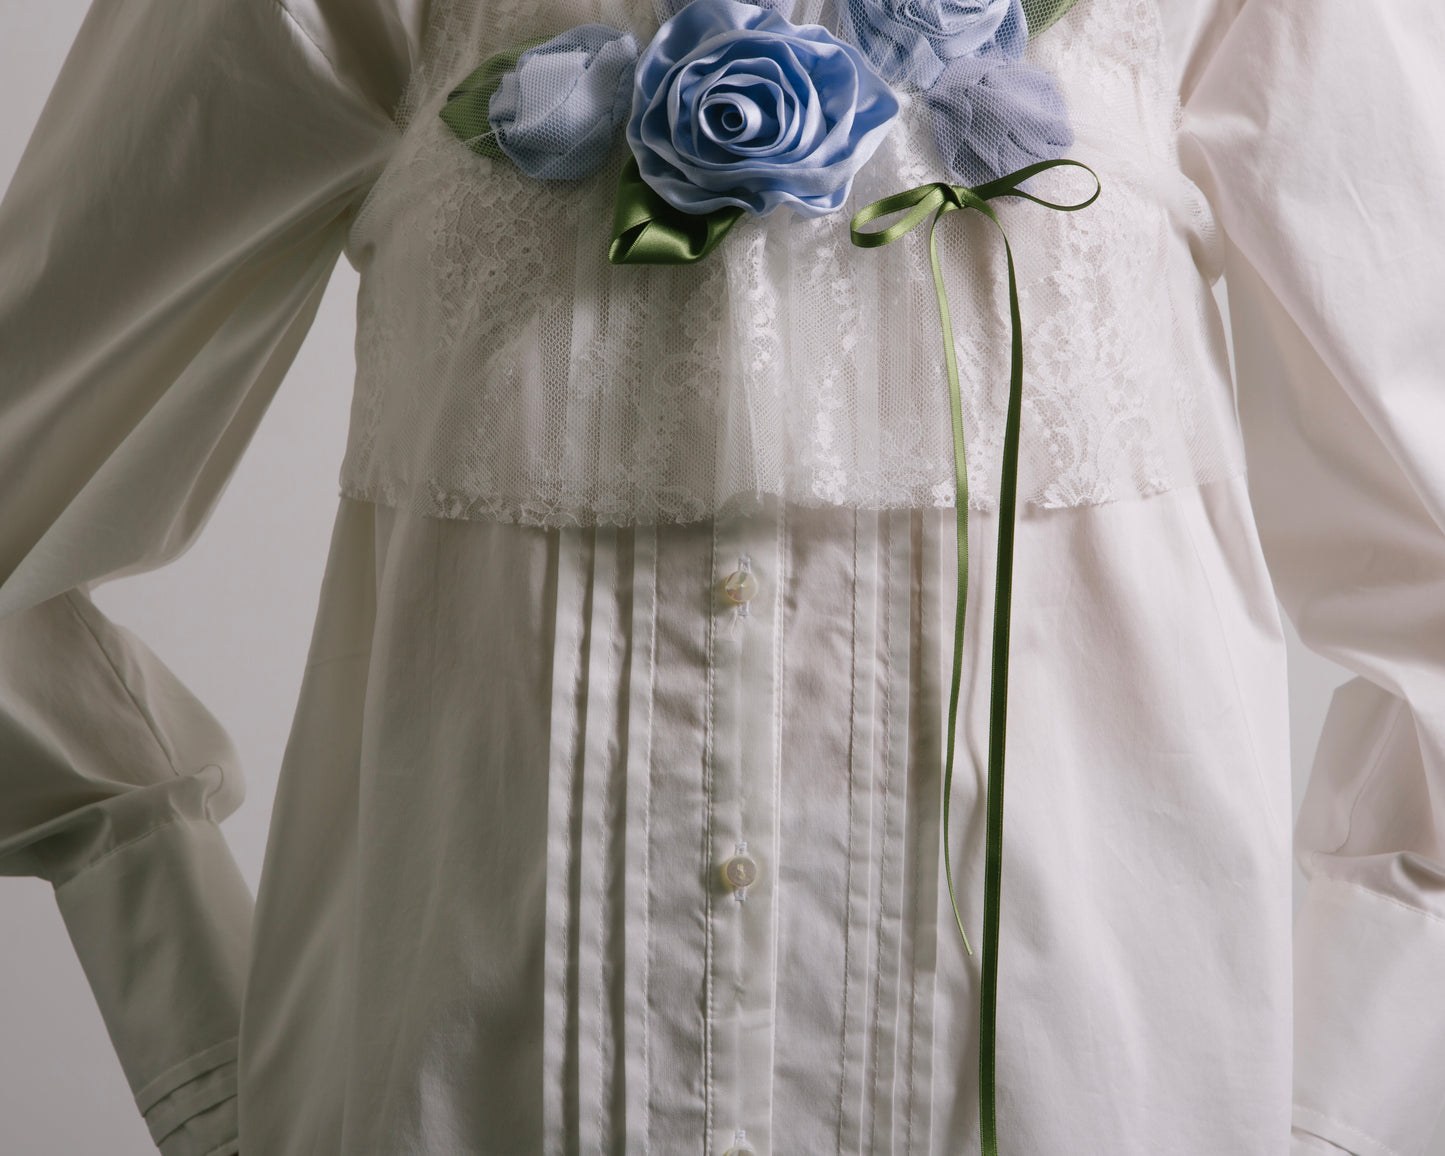 Tulle Blouse of “Roses in the Painting”